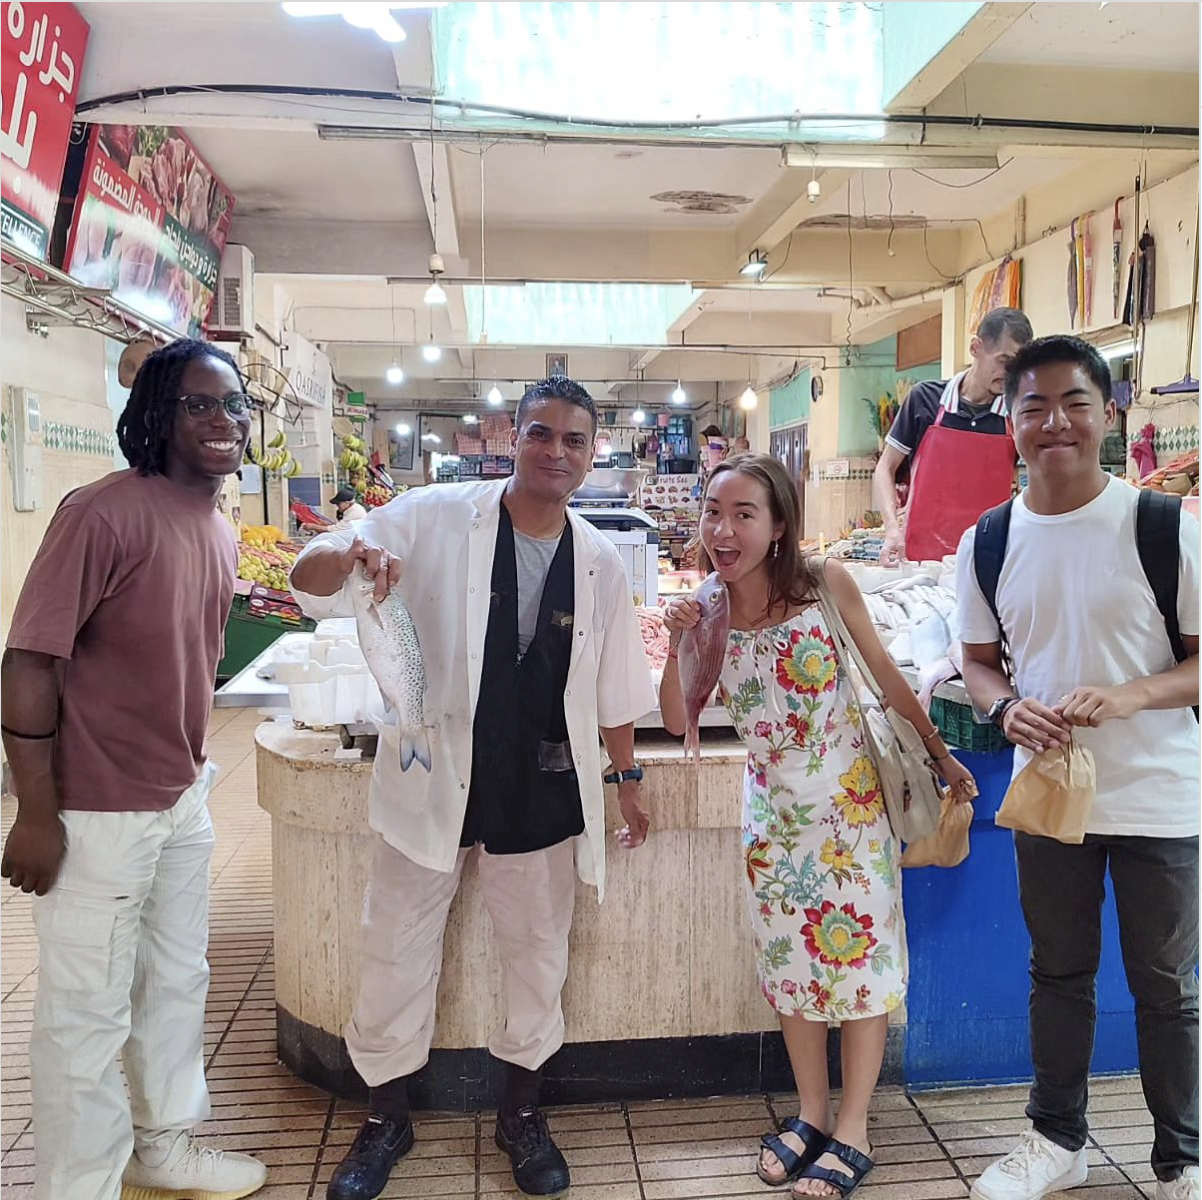 Students pointing to a vendor holding a fish in a Moroccan market